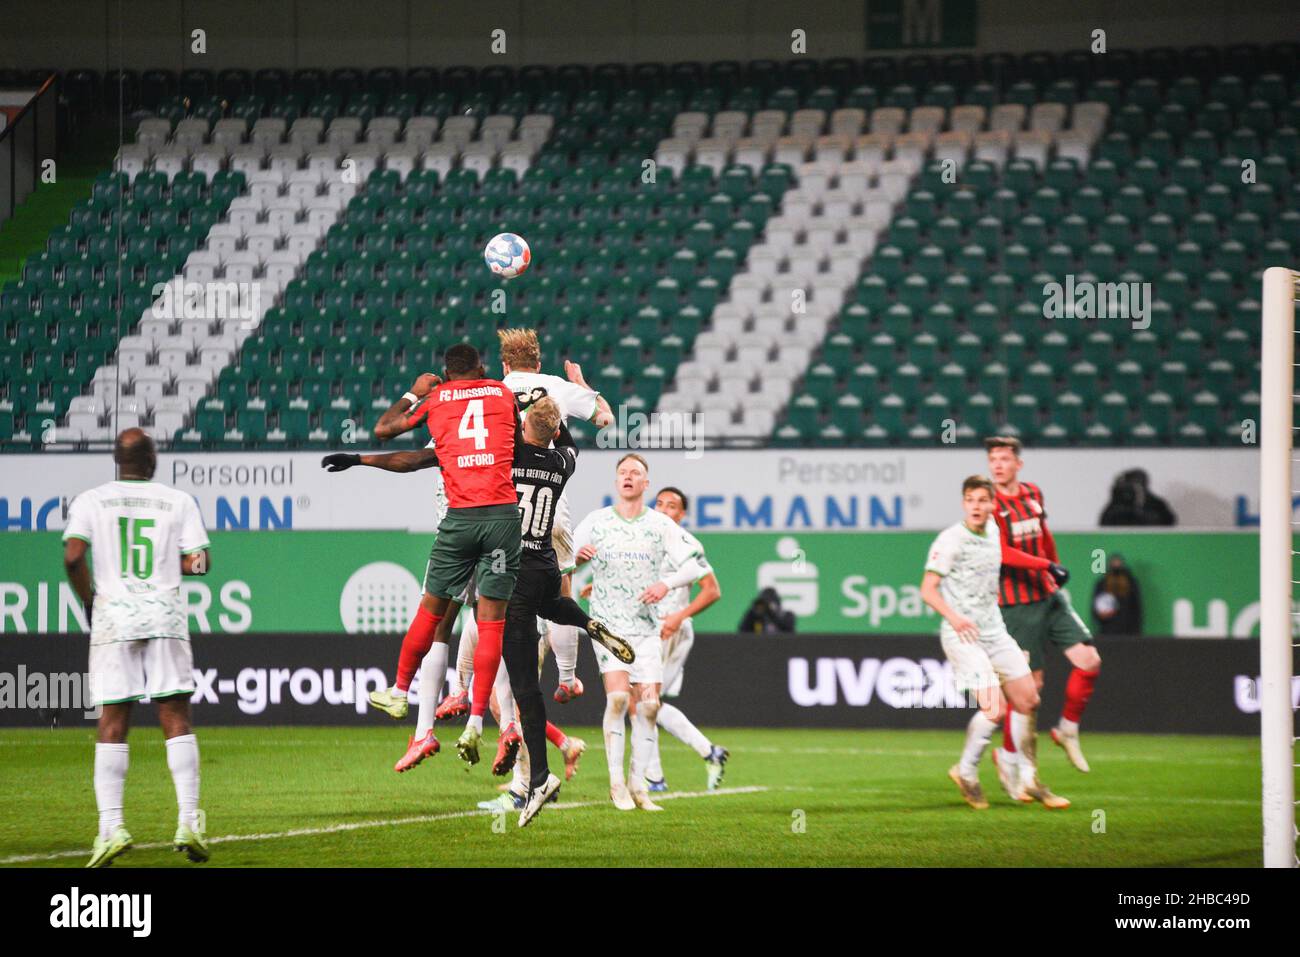 Germany ,Fuerth, Sportpark Ronhof Thomas Sommer - 18 Dec 2021 - Fussball, 1.Bundesliga - SpVgg Greuther Fuerth vs. FC Augsburg  Image: (fLTR) Reece Oxford (FC Augsburg, 4), /g307, Sebastian Griesbeck (SpVgg Greuther Fürth,22)  DFL regulations prohibit any use of photographs as image sequences and or quasi-video Credit: Ryan Evans/Alamy Live News Stock Photo